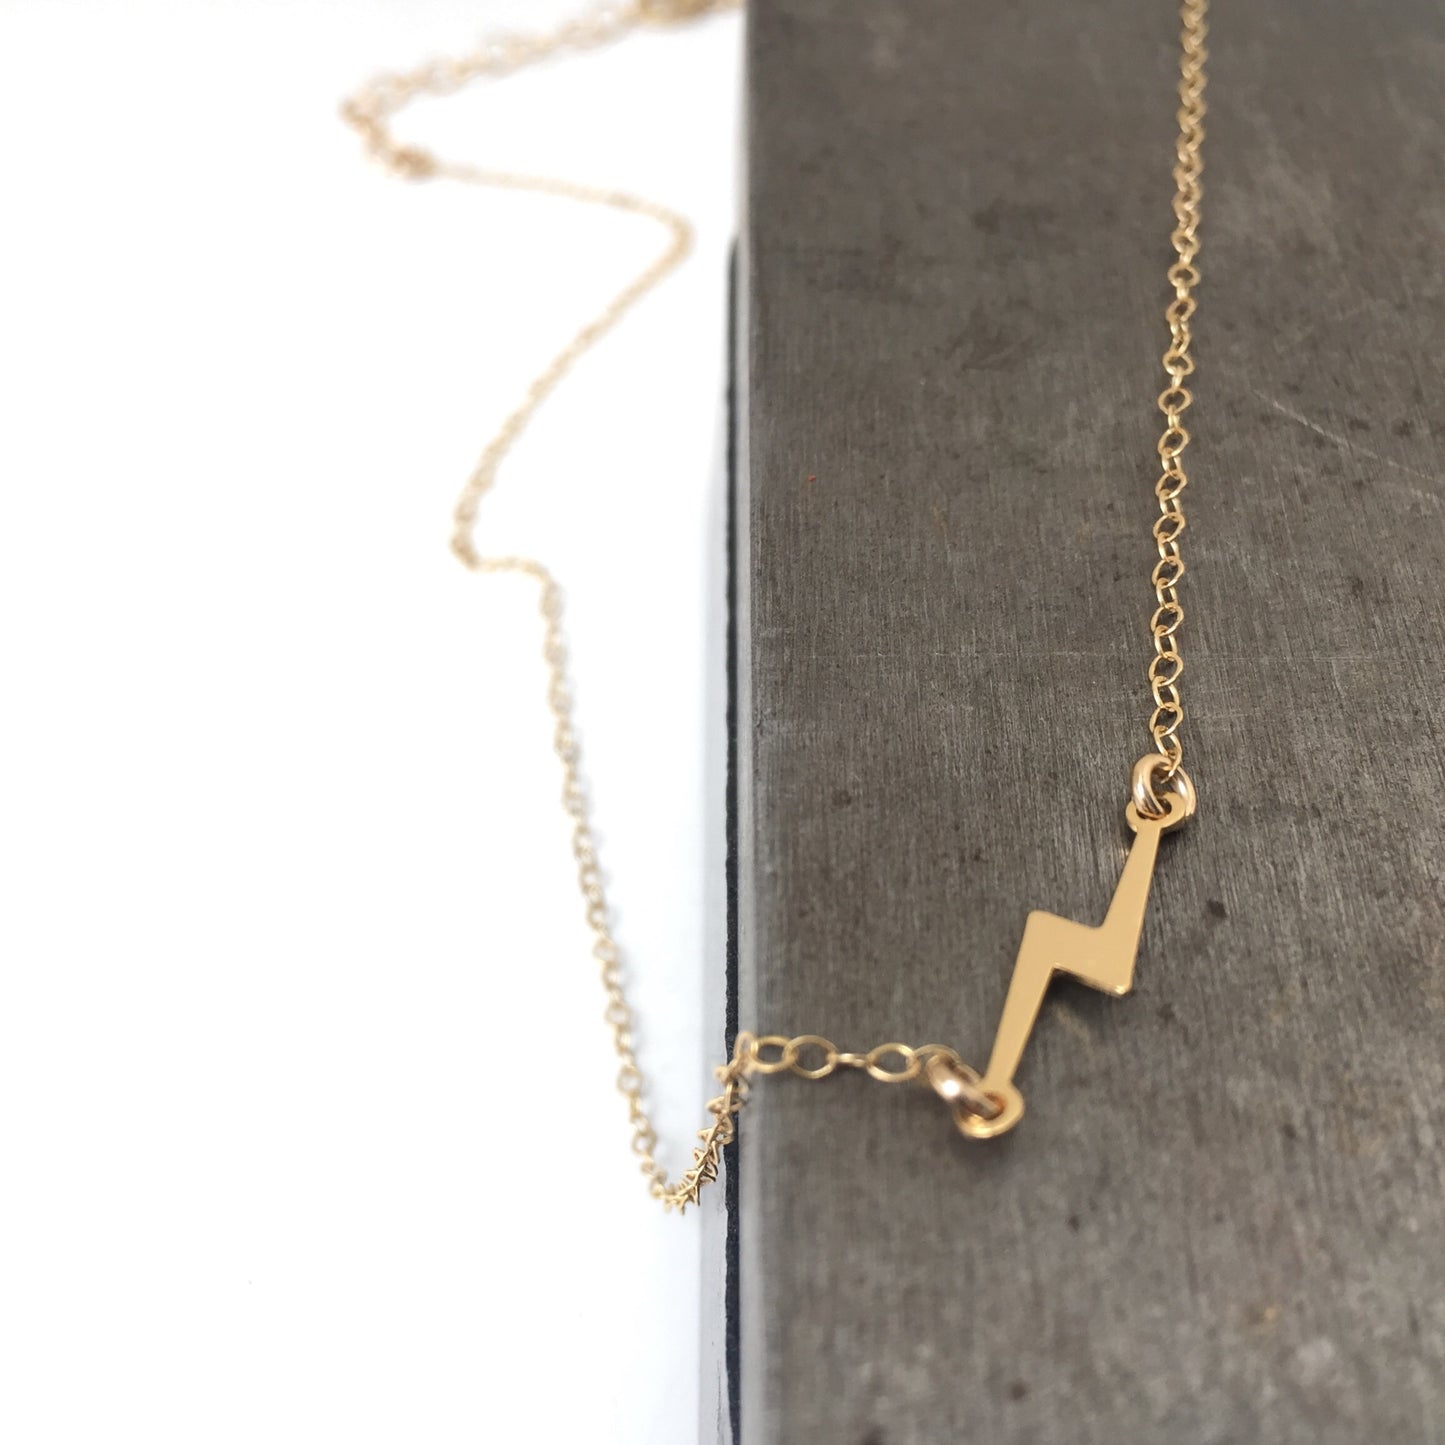 The Bolt Necklace